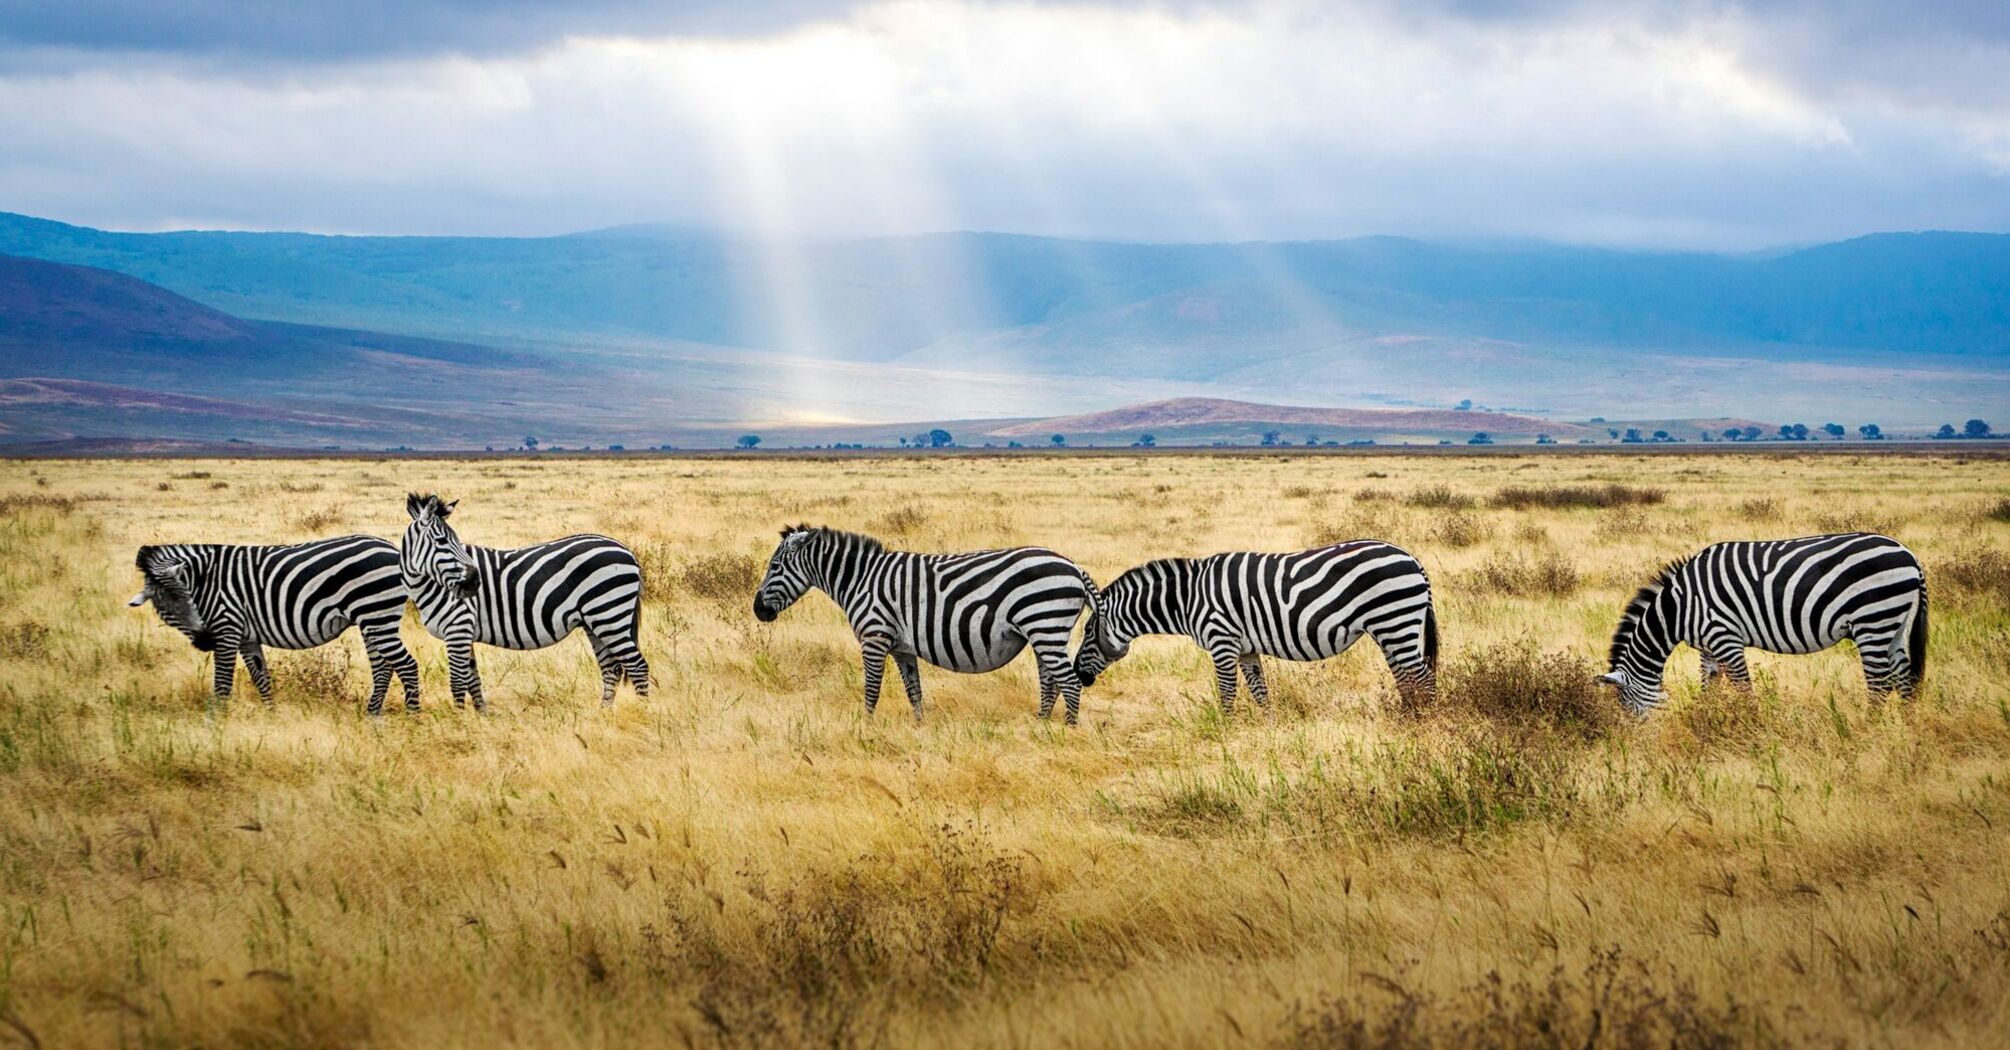 Zebras grazing on the plains under a cloudy sky in Tanzania